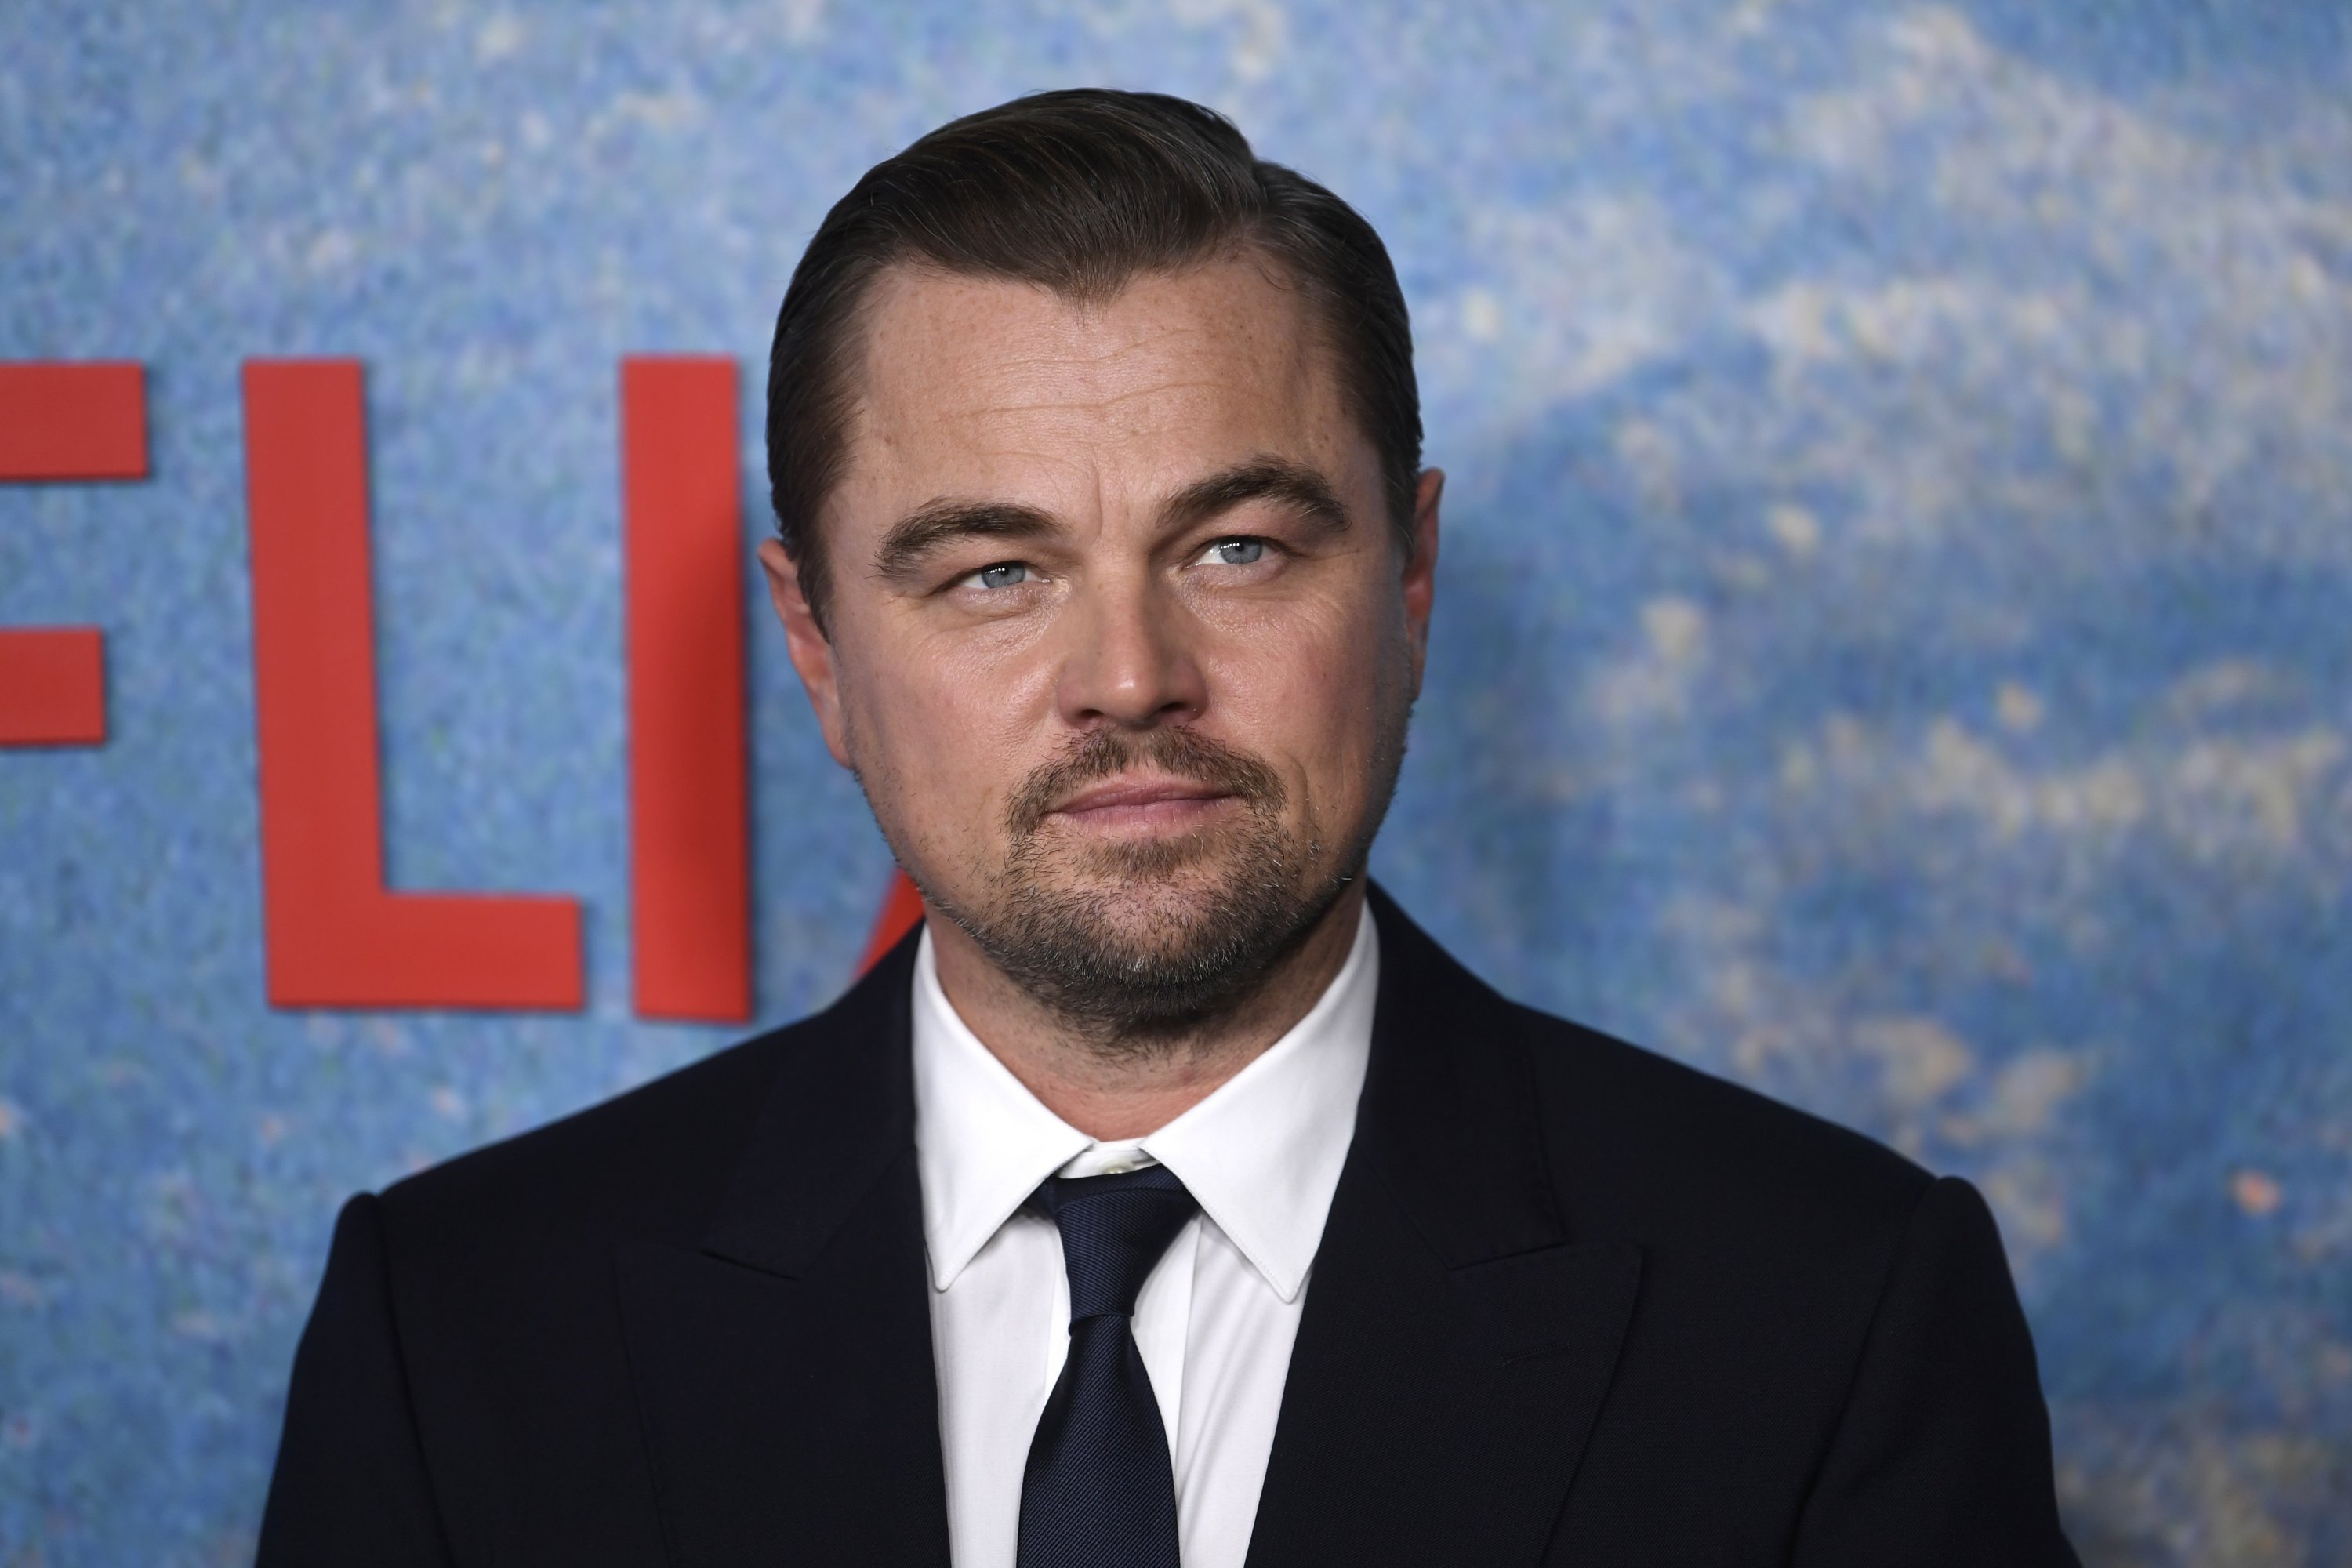 Leonardo DiCaprio attends the world premiere of "Don't Look Up" at Jazz at Lincoln Center in New York, U.S., Dec. 5, 2021, . (AP)